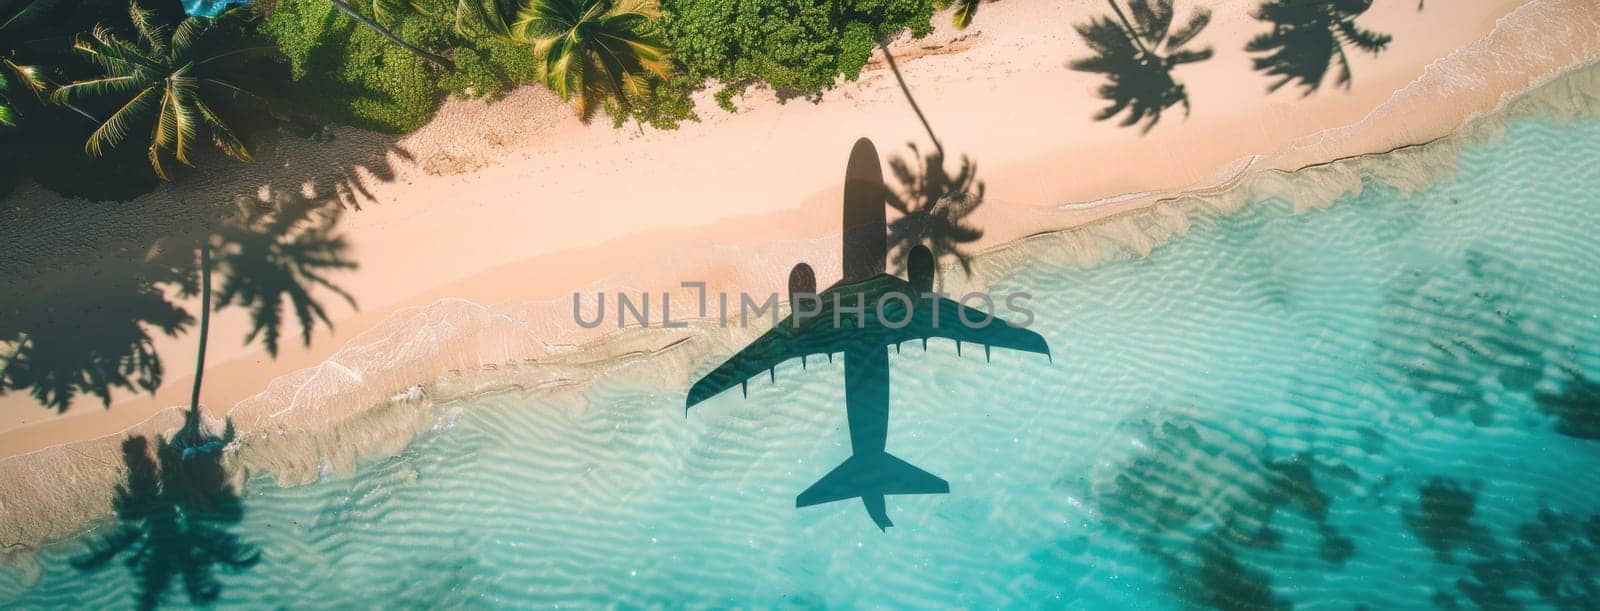 Traveling paradise aerial view of airplane on beach with palm trees on sandy shore